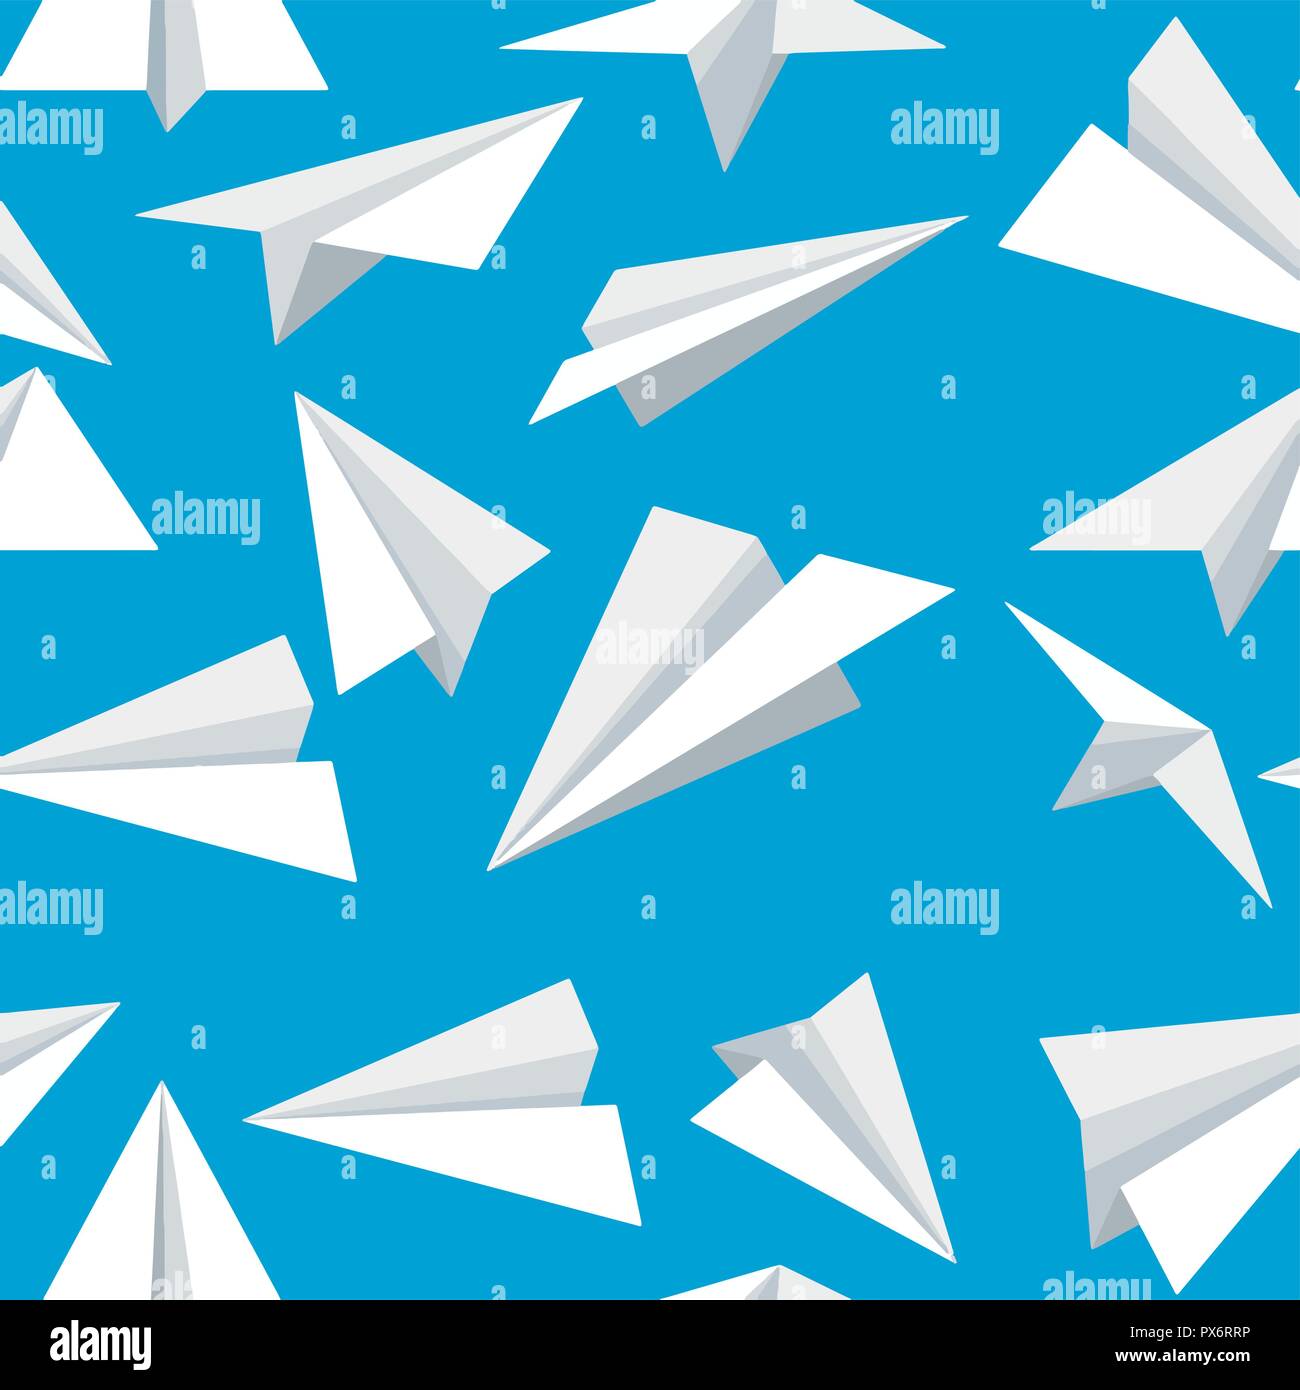 Seamless pattern. White paper planes. Flat airplanes. Vector illustration on blue background. Stock Vector